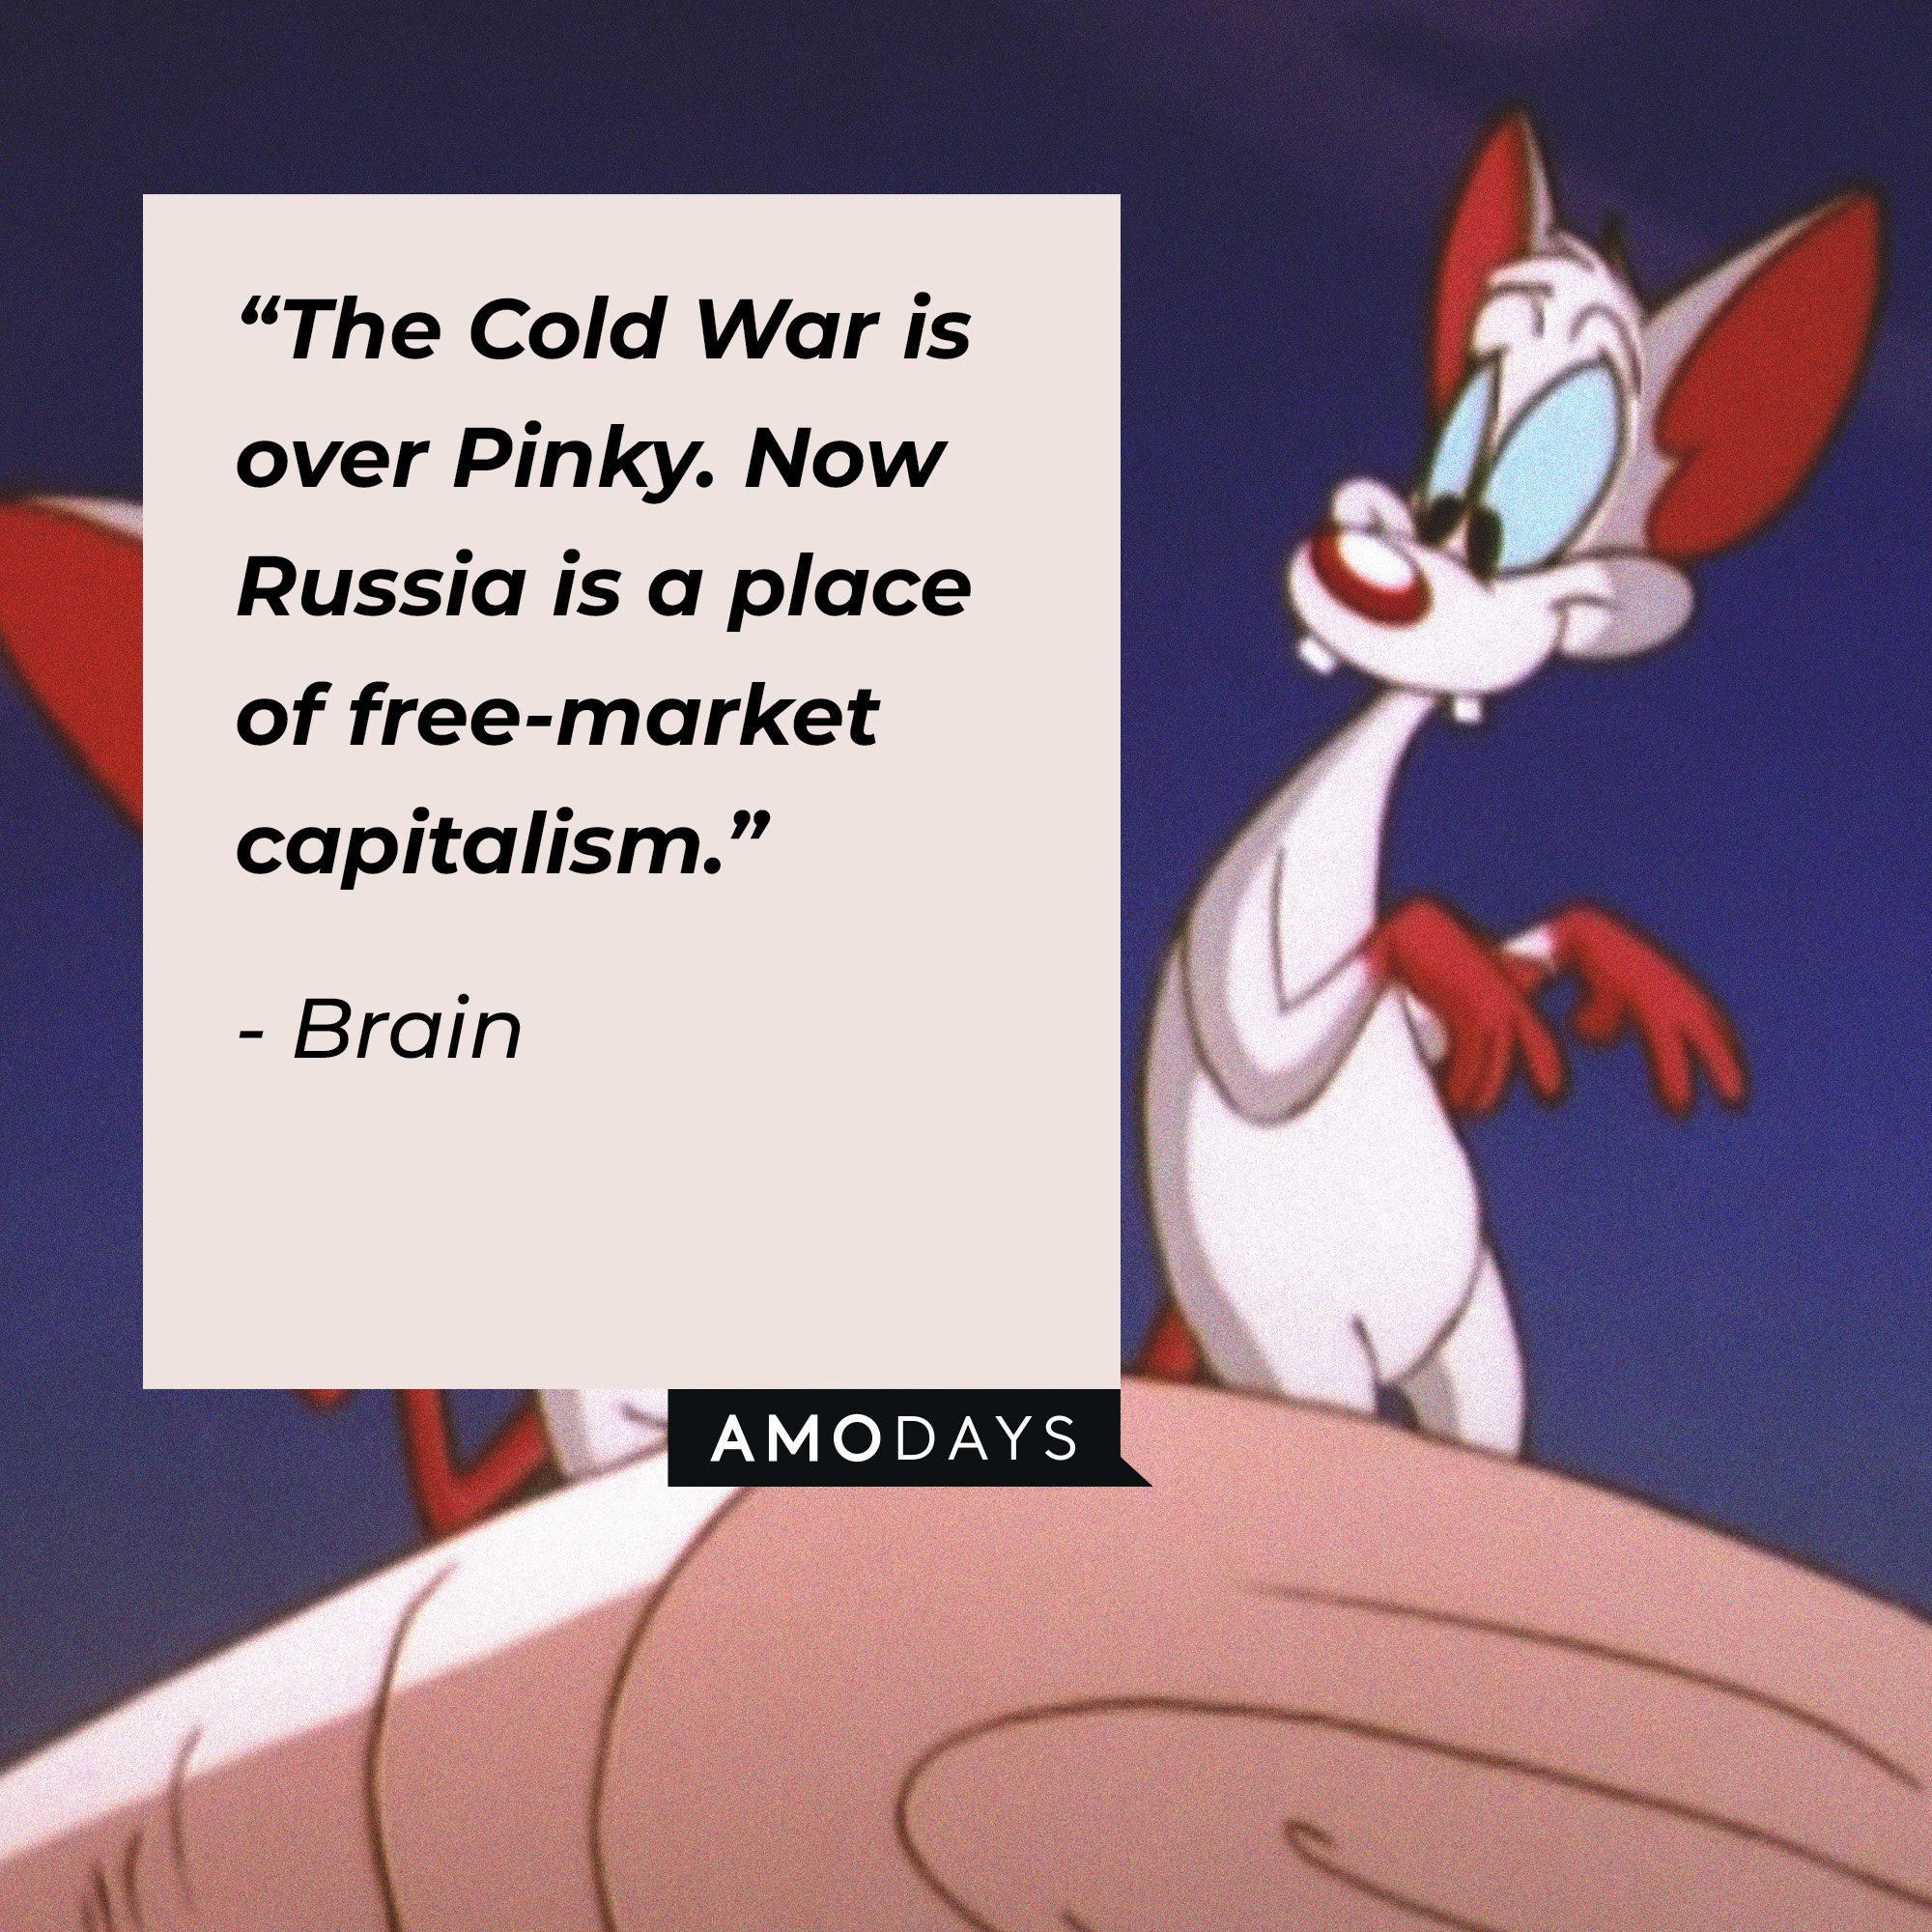 Brain's quote: “The Cold War is over Pinky. Now Russia is a place of free-market capitalism.” | Image: AmoDays